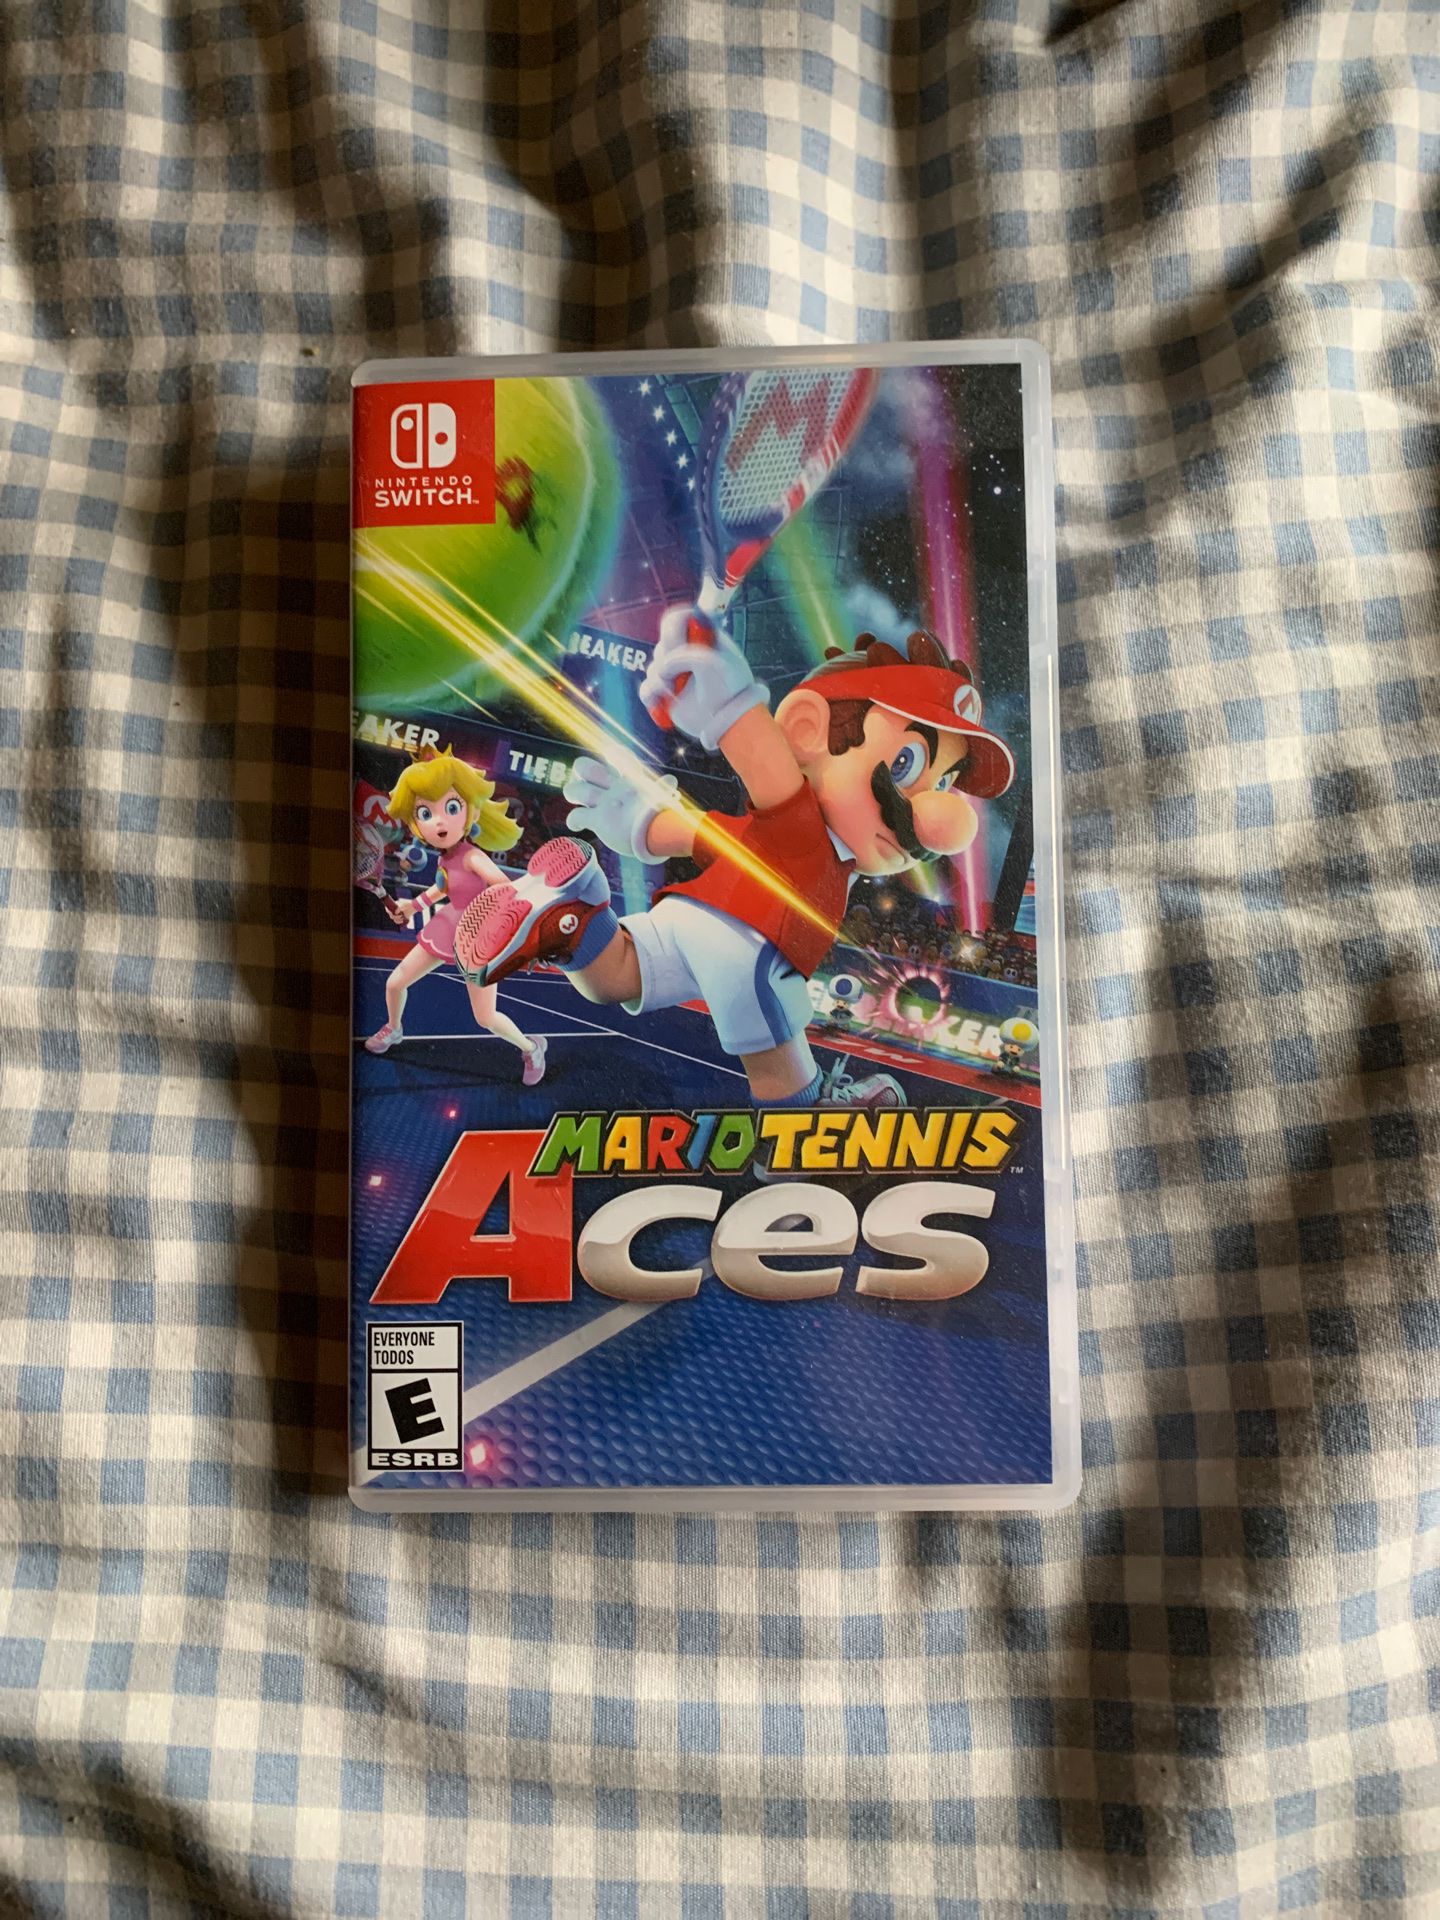 Mario tennis aces for the Nintendo Switch